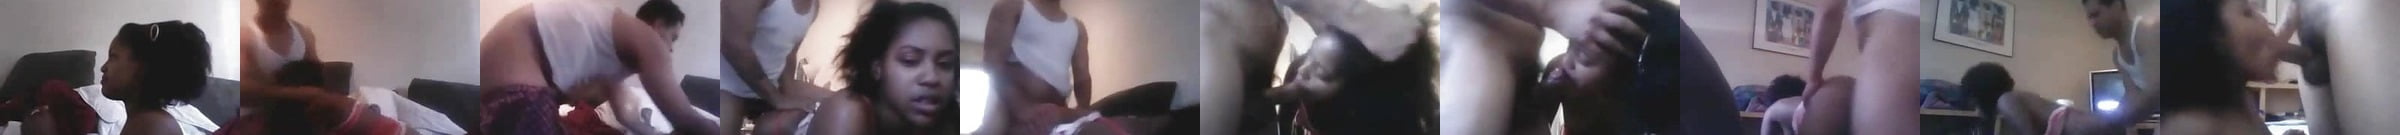 Black Babe Eats Ass Sucks Balls And Sits On His Face